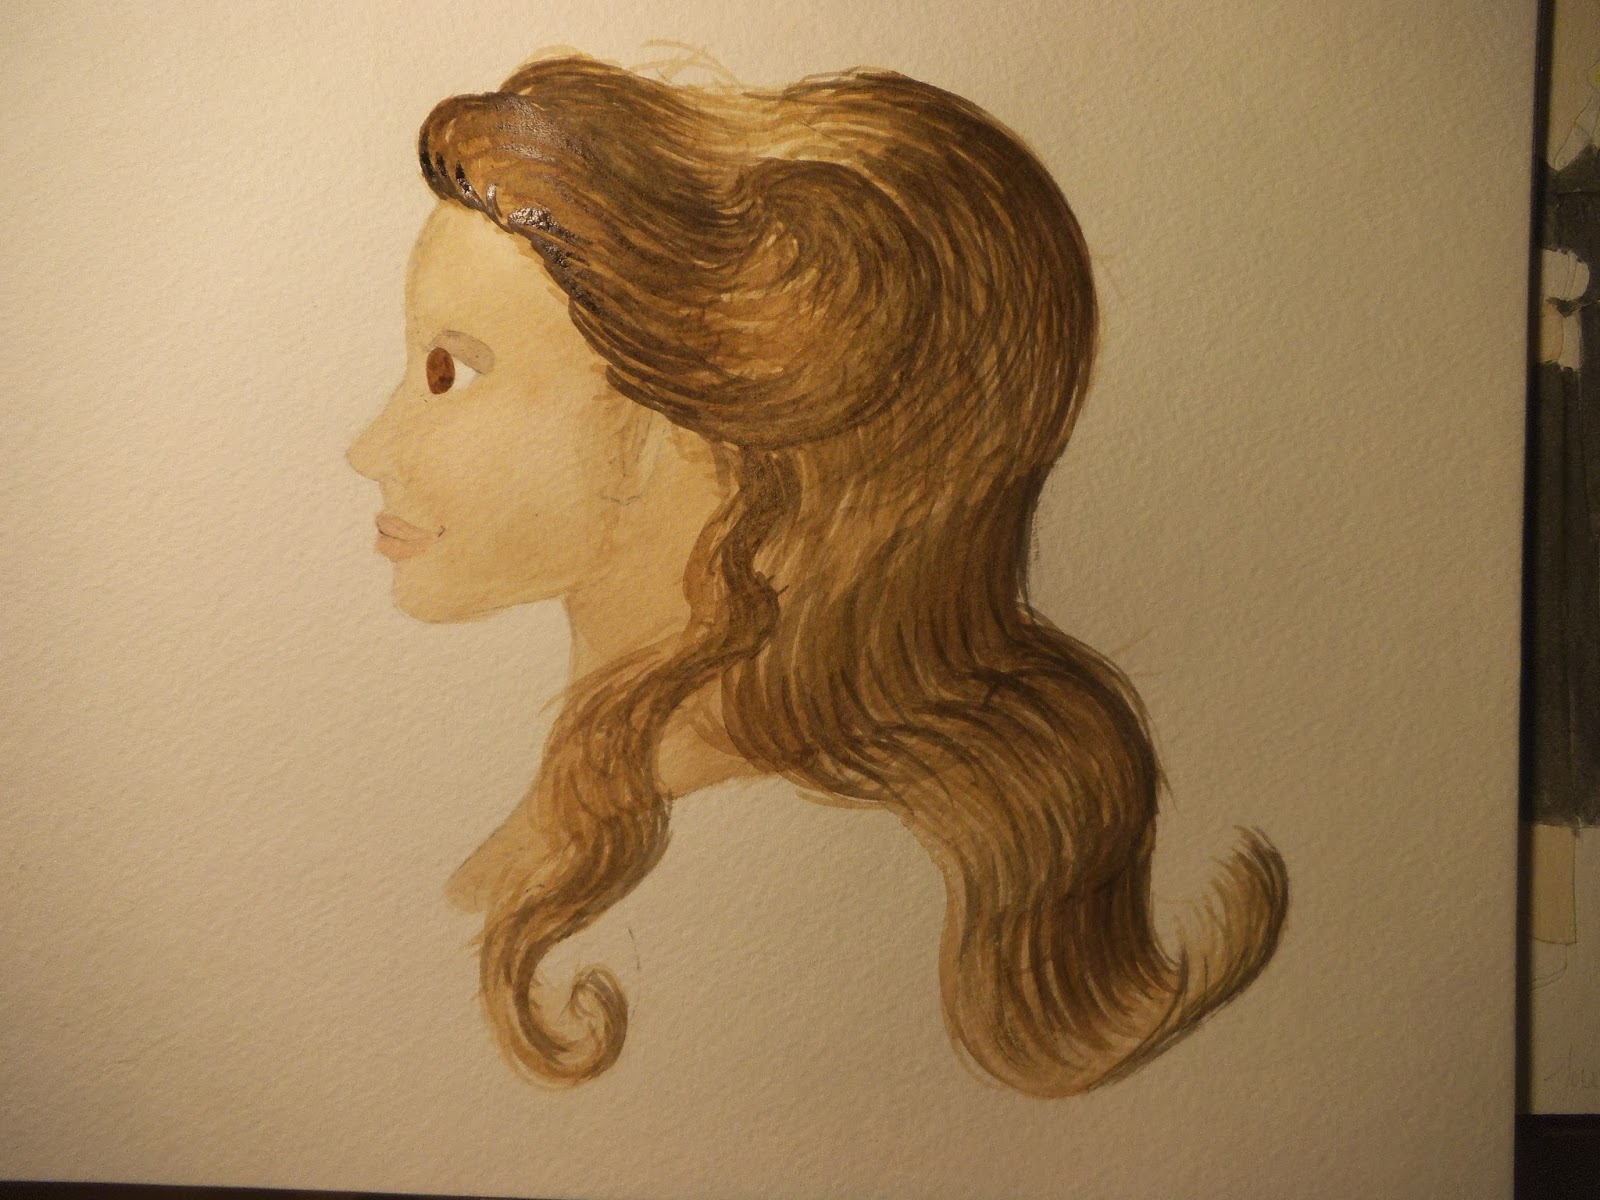 Paper Doll School: Painting Wavy/Curly Hair in Watercolors